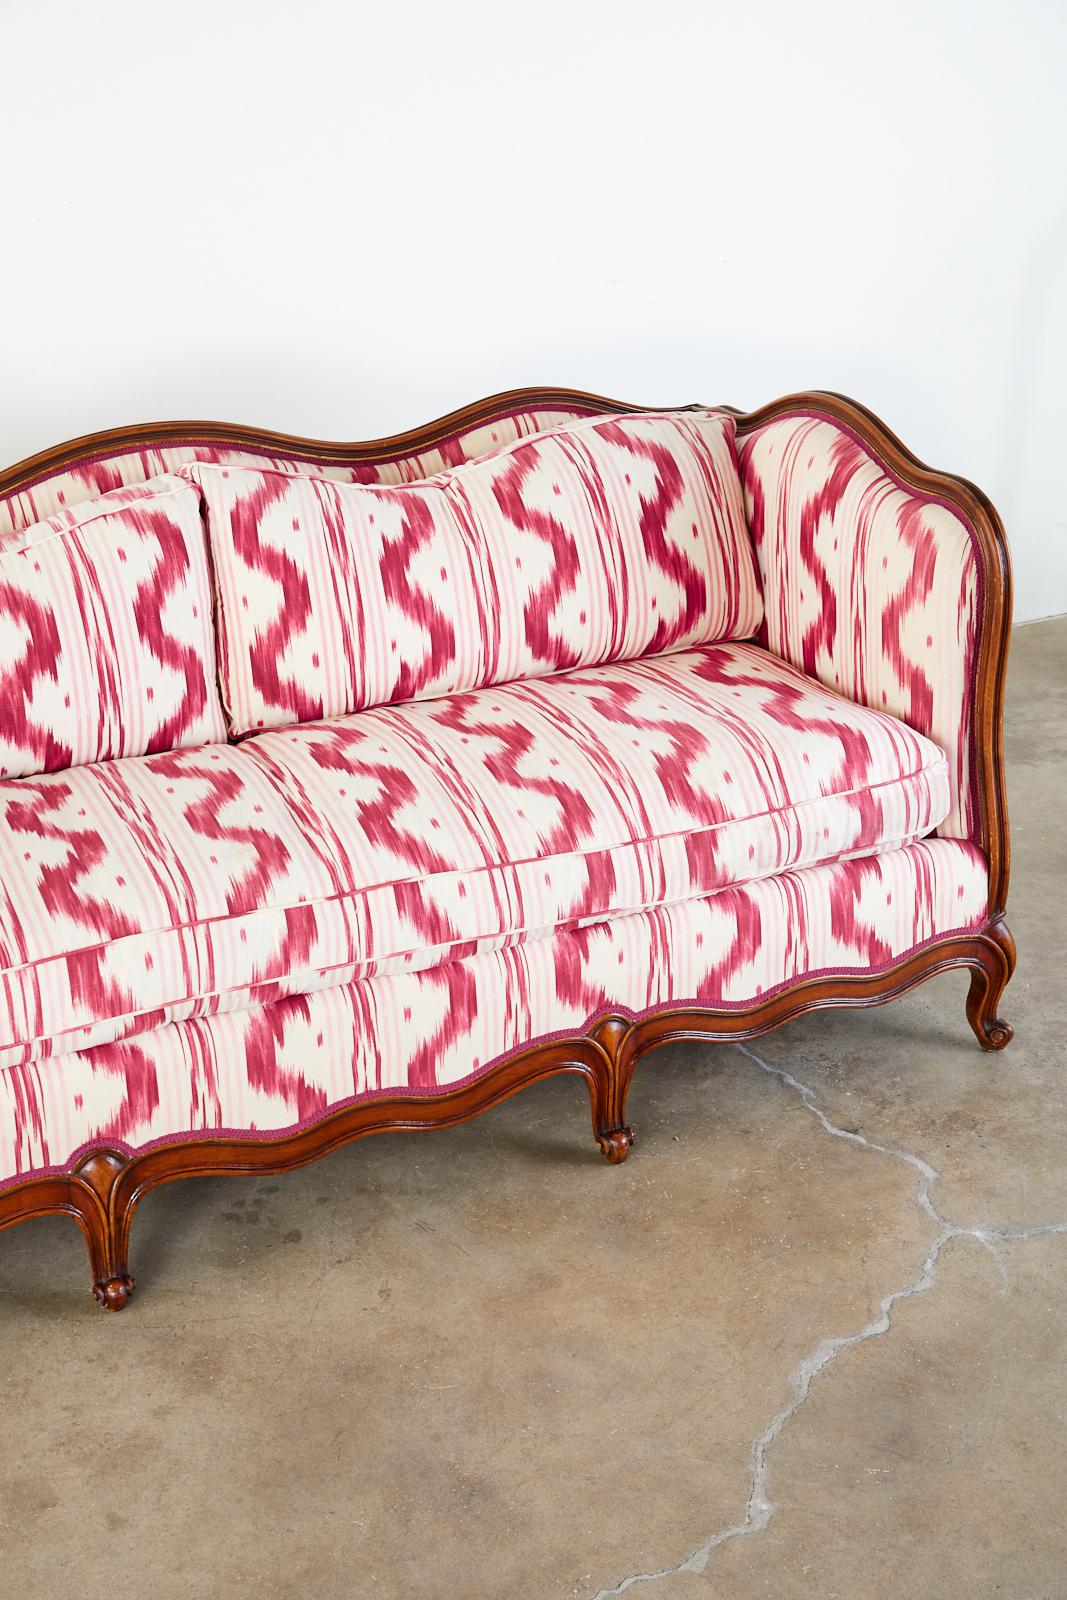 French Provincial Serpentine Canape Settee Pierre Frey Toile Ikat 3